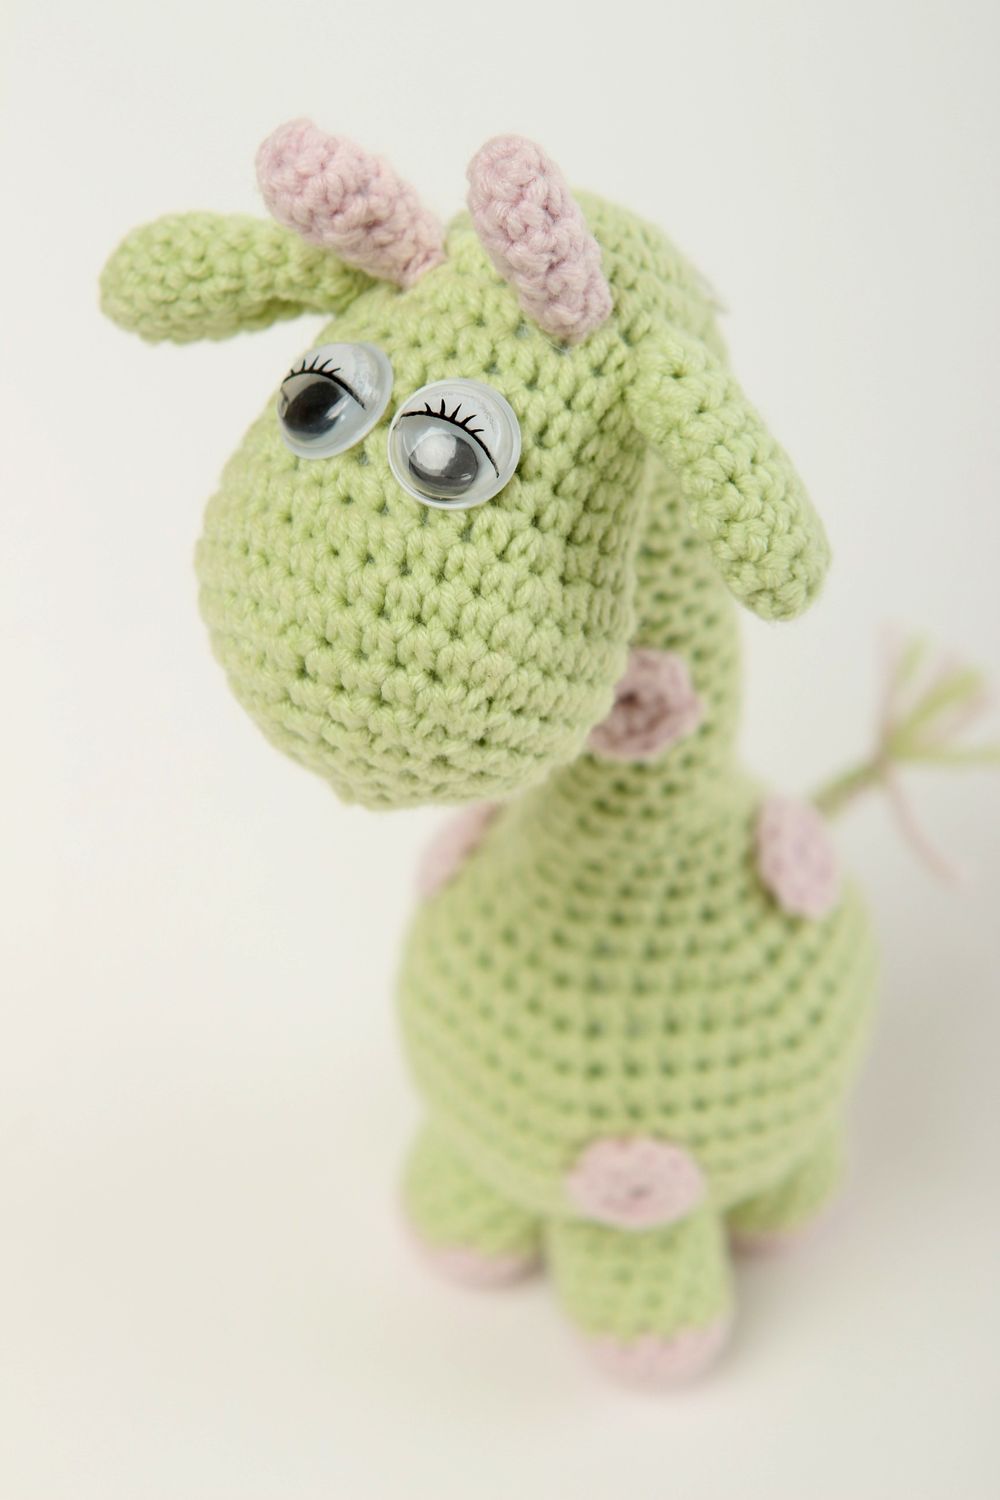 Handmade soft toy giraffe baby toy decorative crocheted toy cute toy for kids photo 3